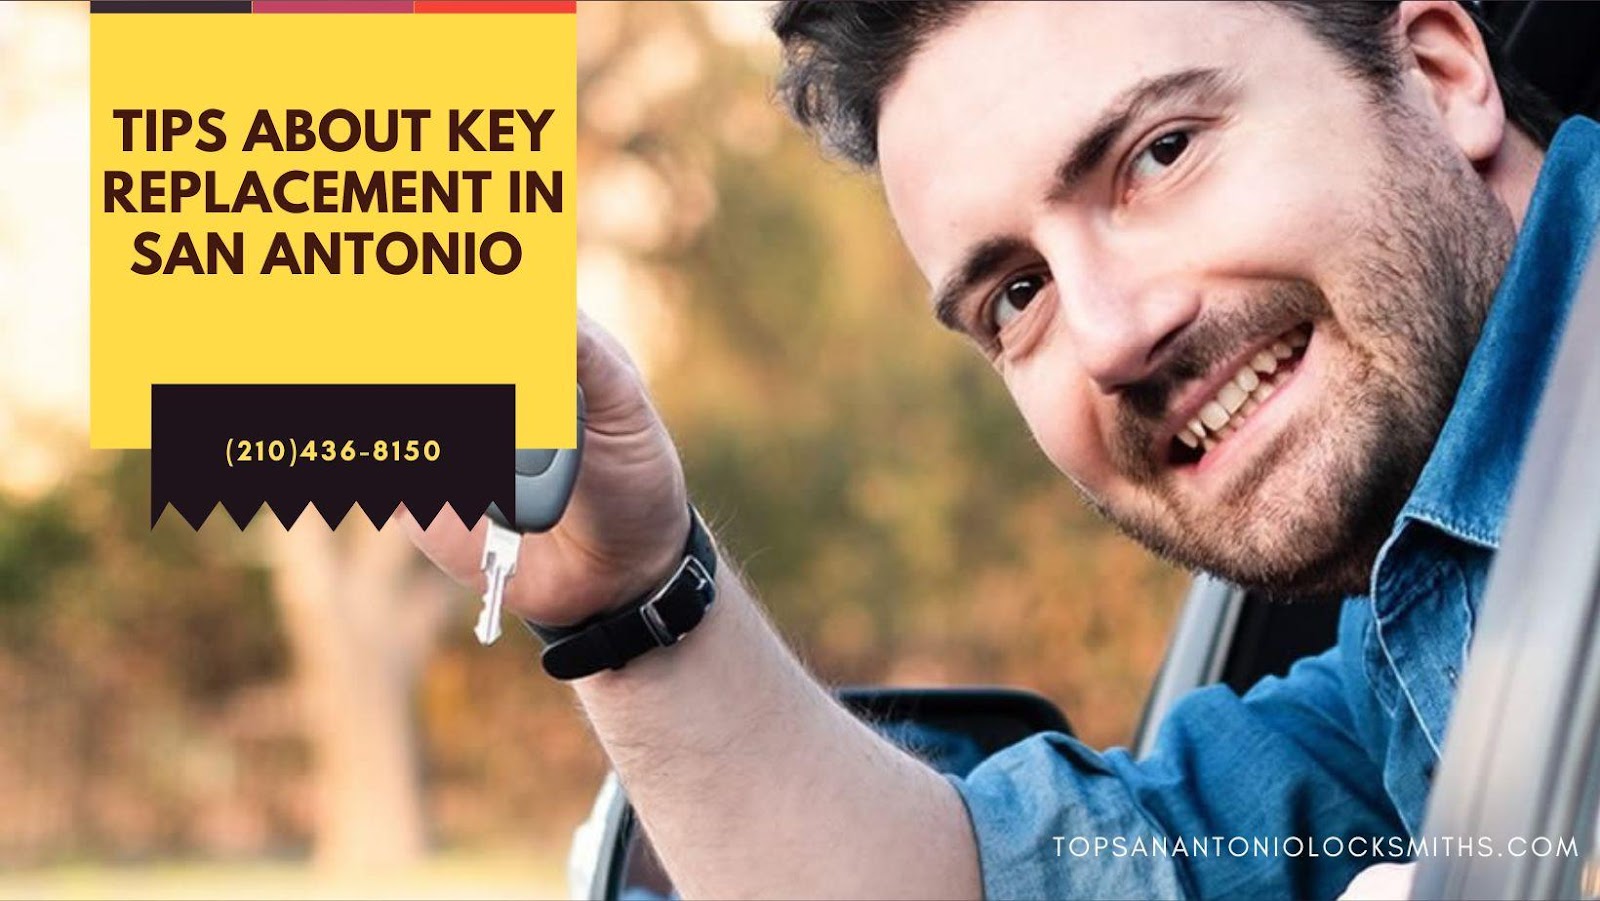 Tips About Key Replacement in San Antonio You Need to Know